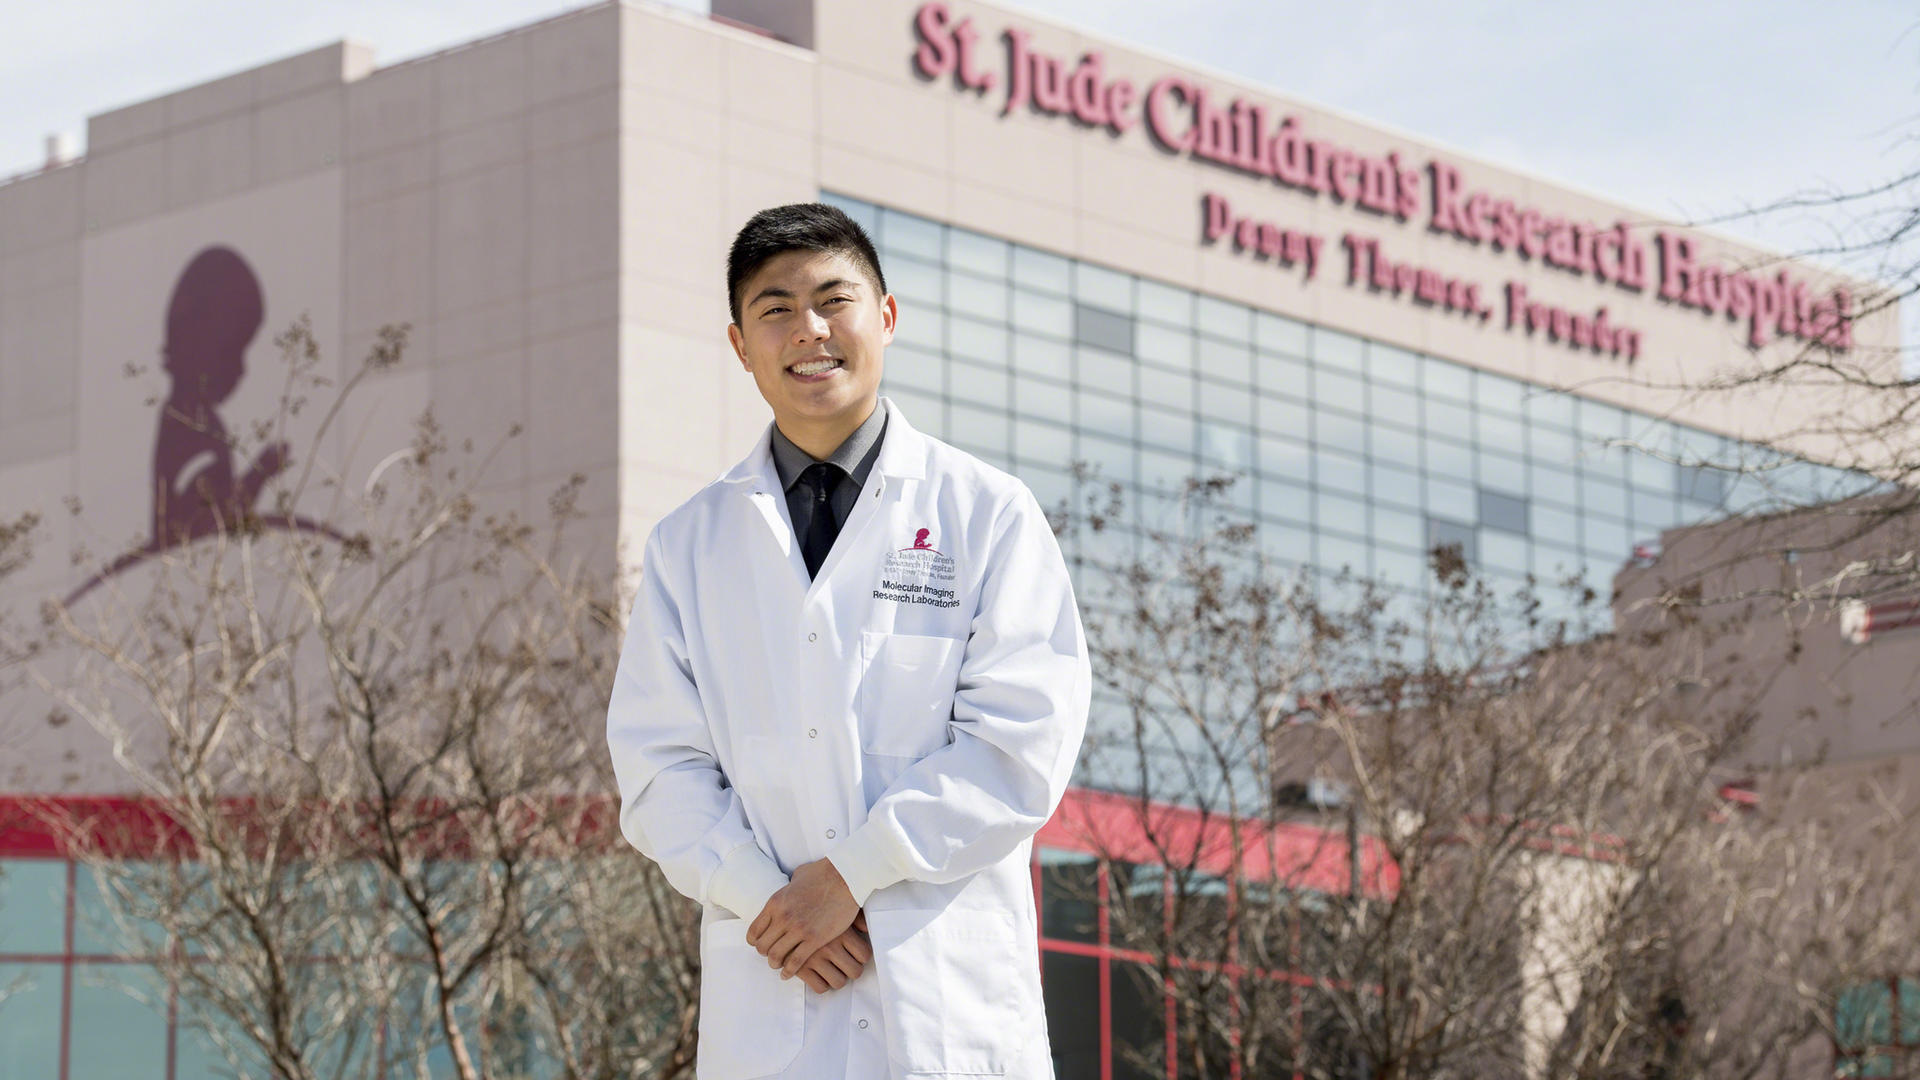 A young man in a white coat stands outside St. Jude Children's Research Hospital.